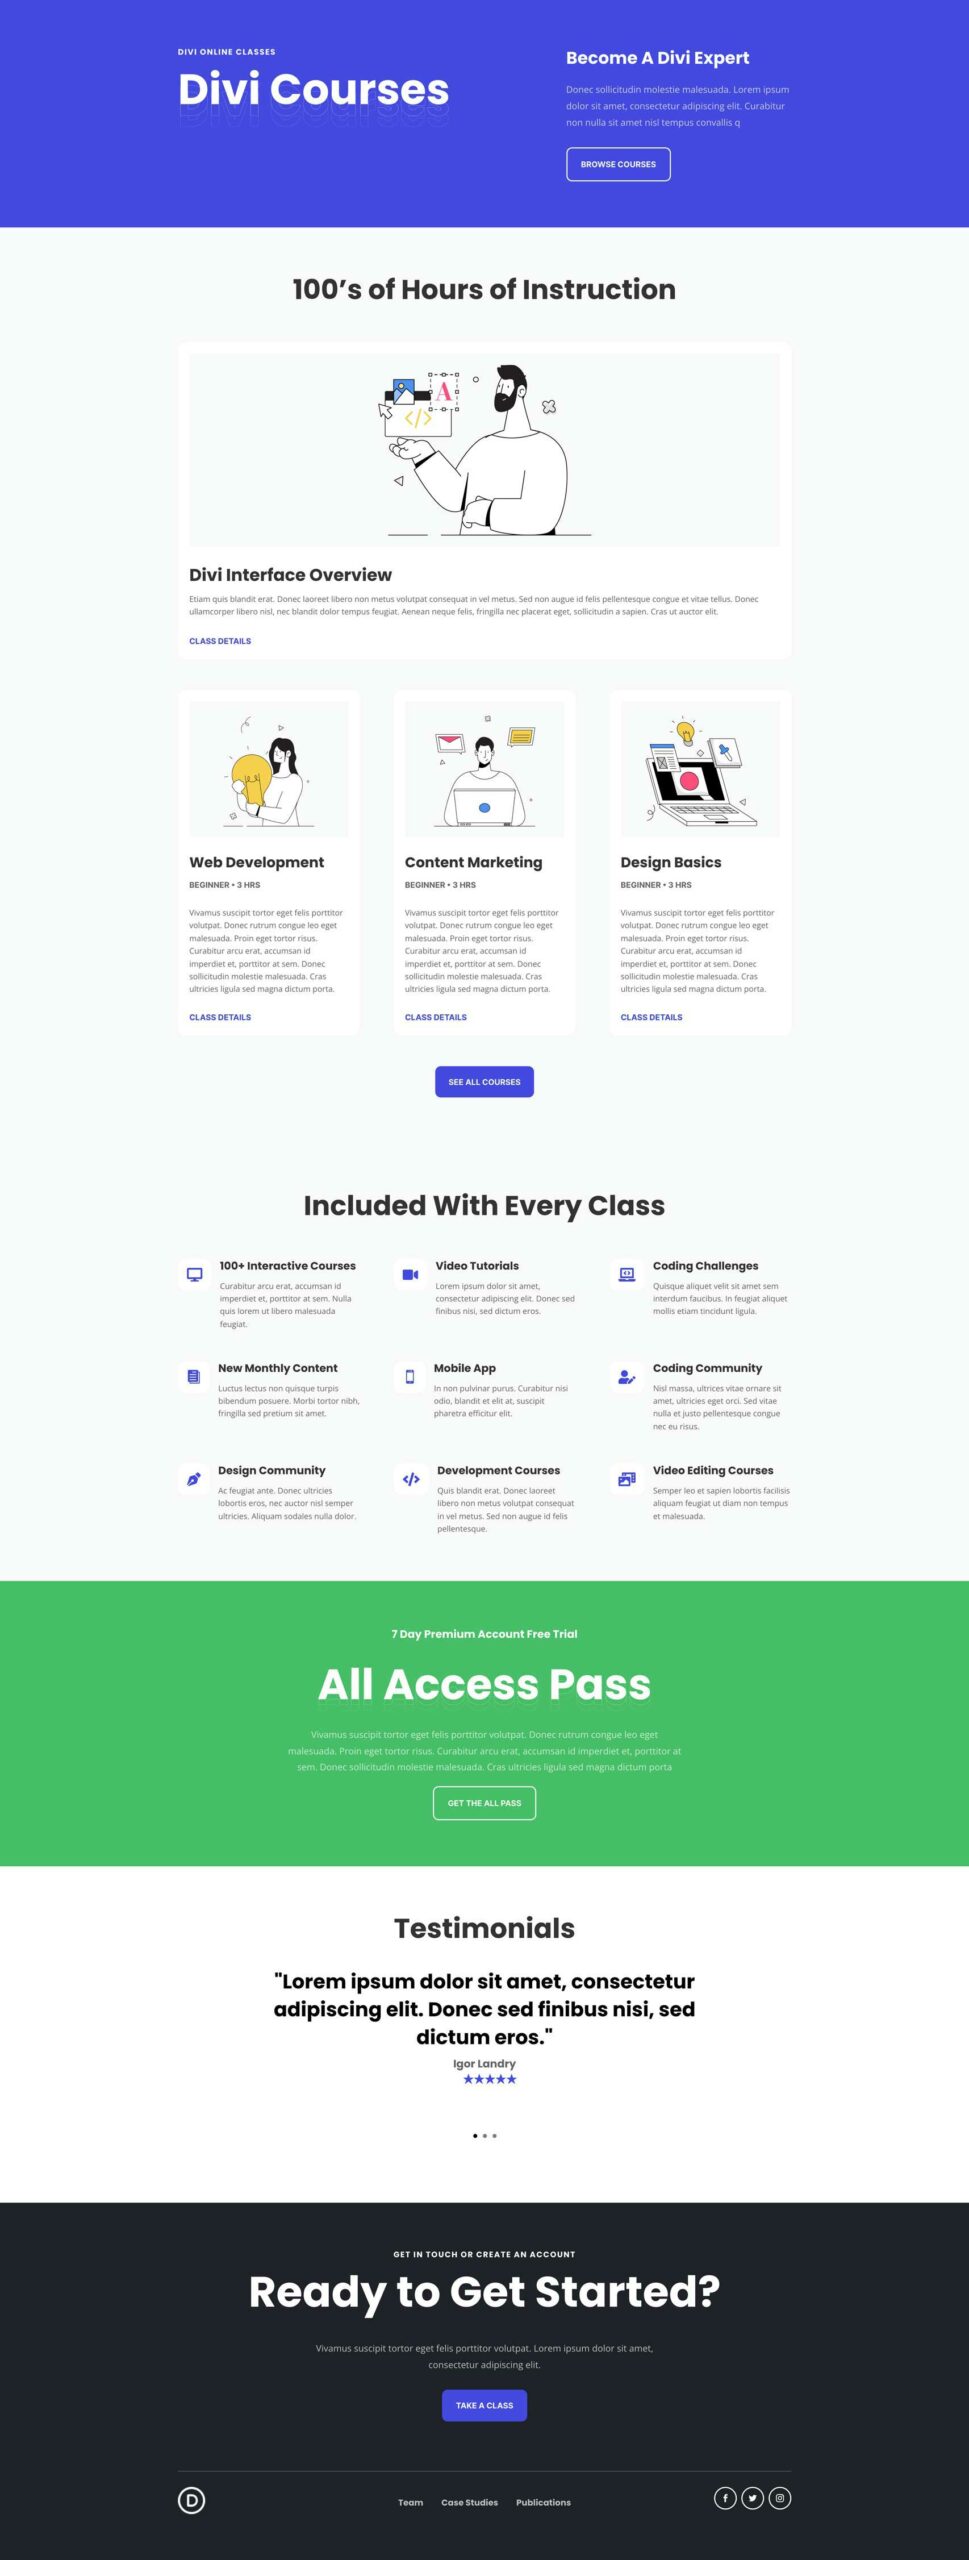 Learning Management System Layout Pack for Divi